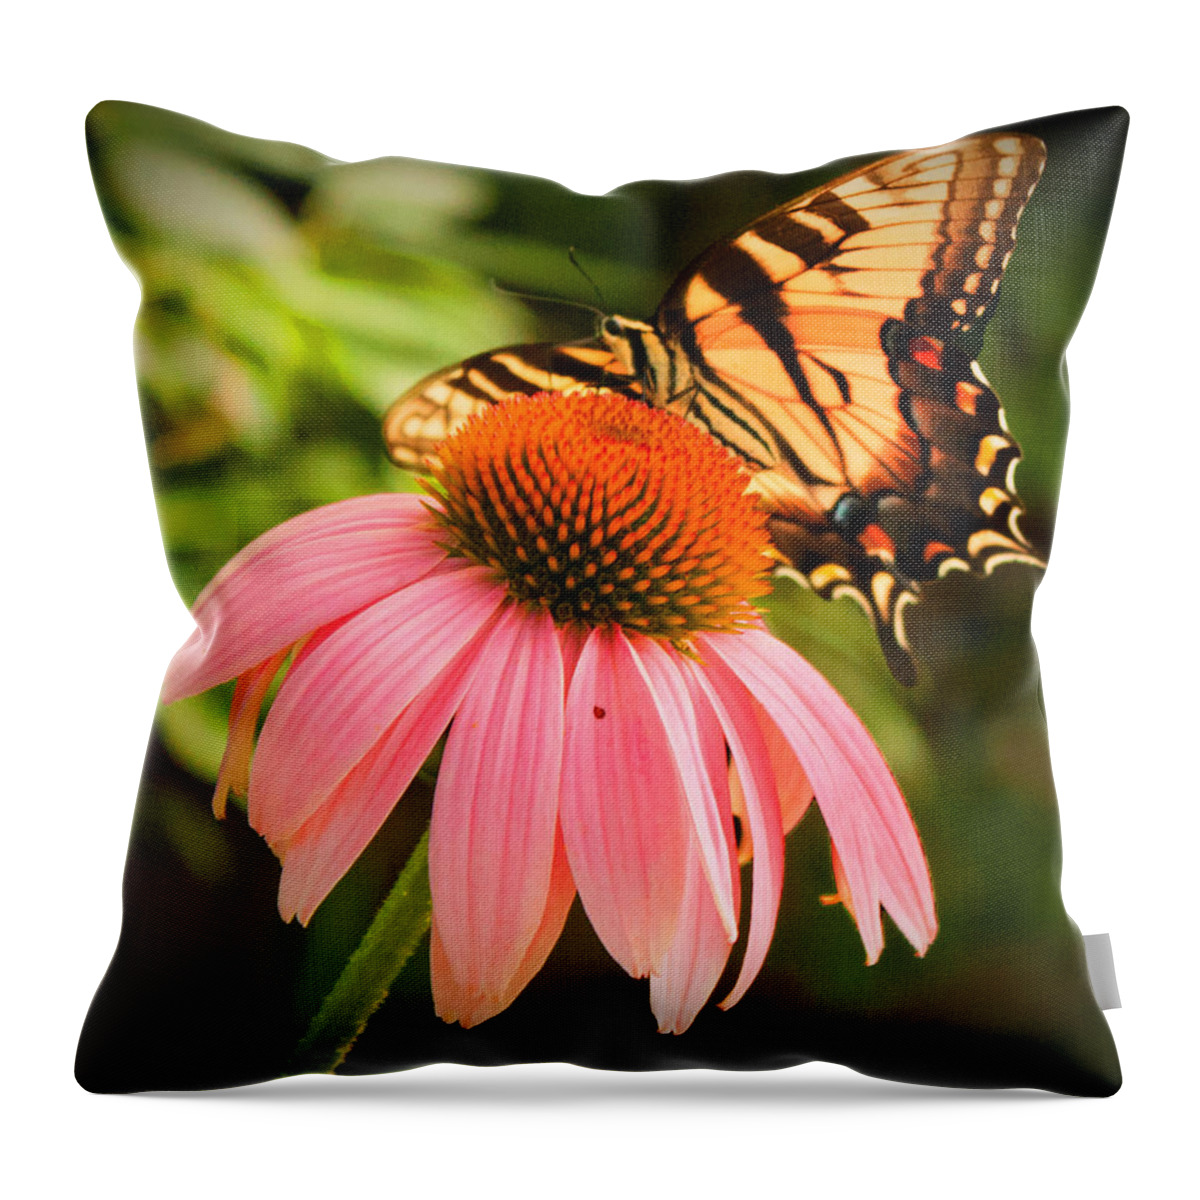 Tiger Swallowtail Butterfly Throw Pillow featuring the photograph Tiger Swallowtail feeding by Michael Porchik